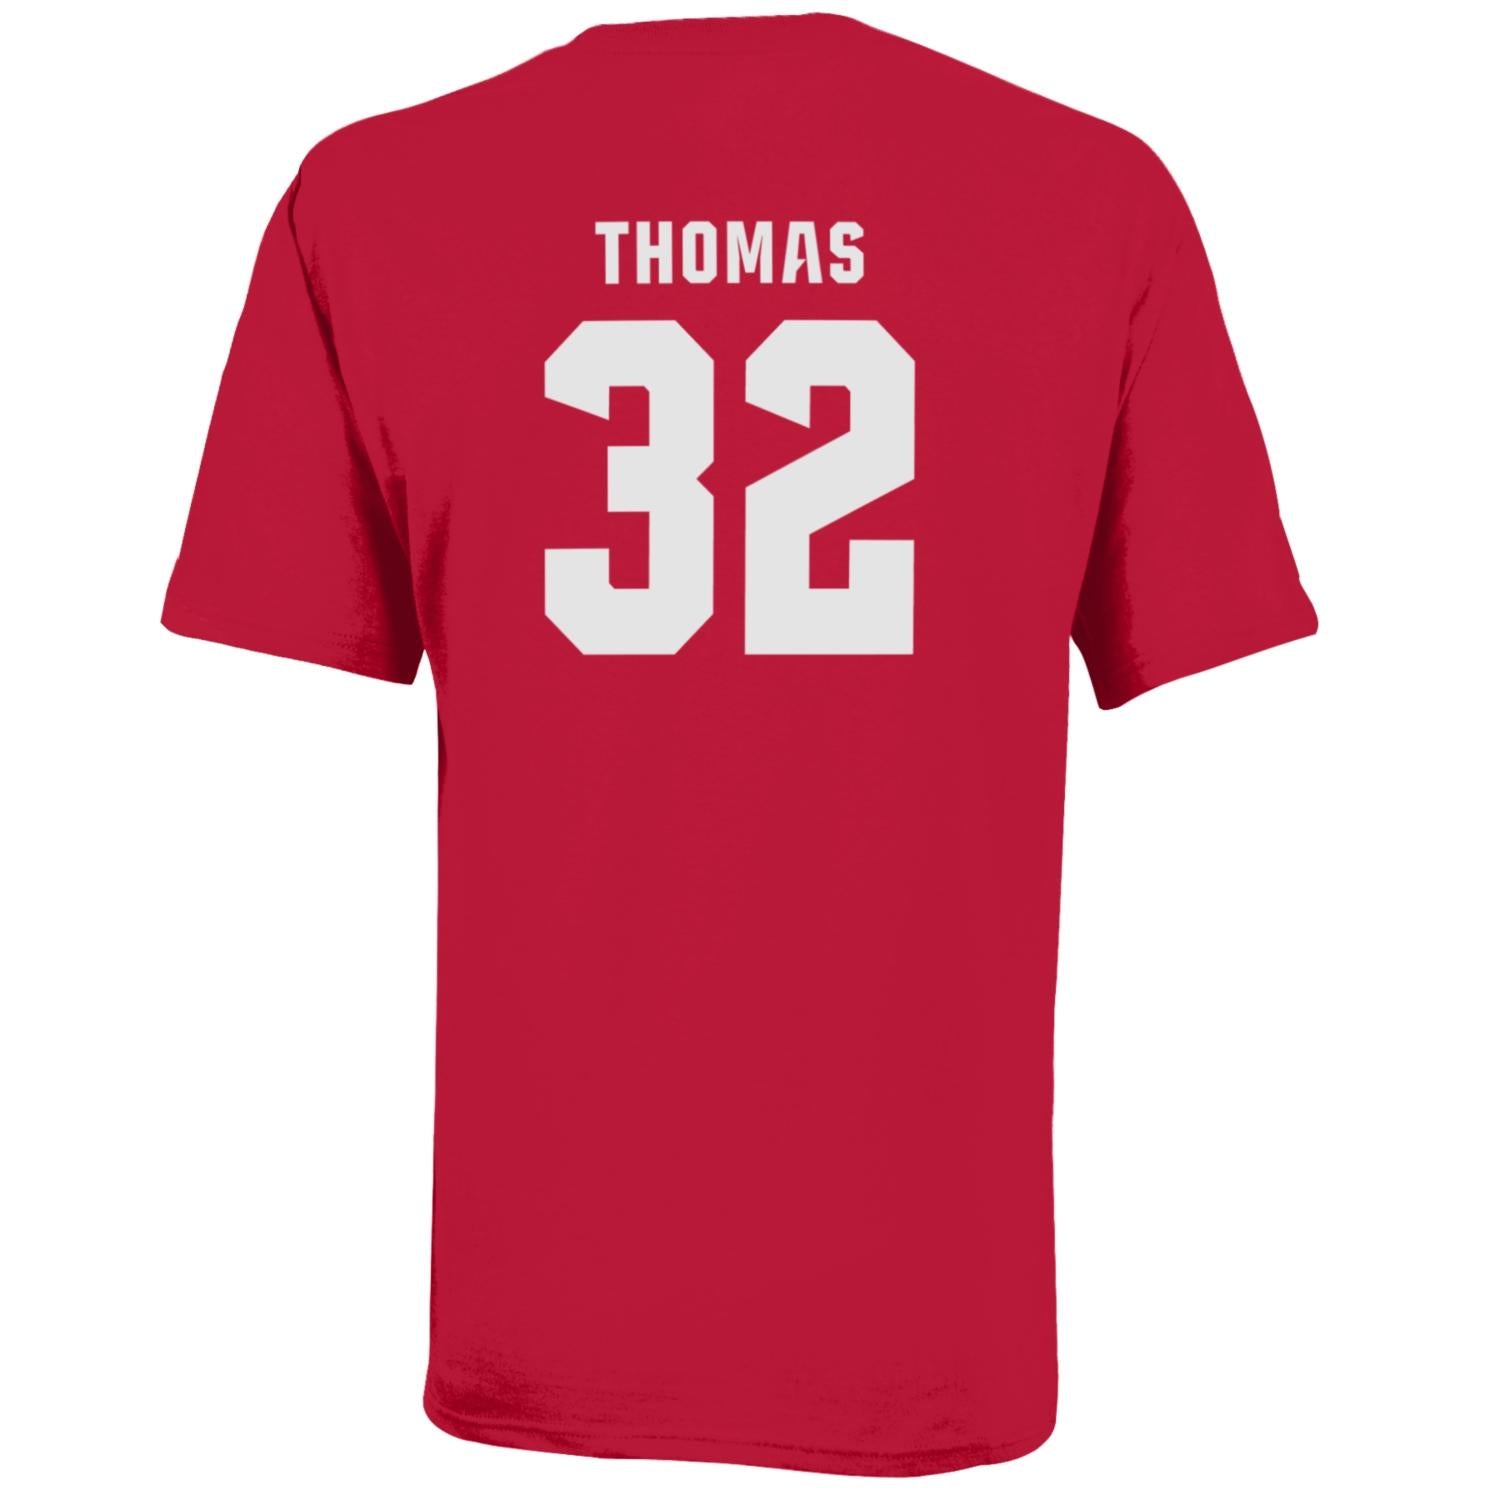 NC State Wolfpack Champion Red Thomas #32 T-Shirt